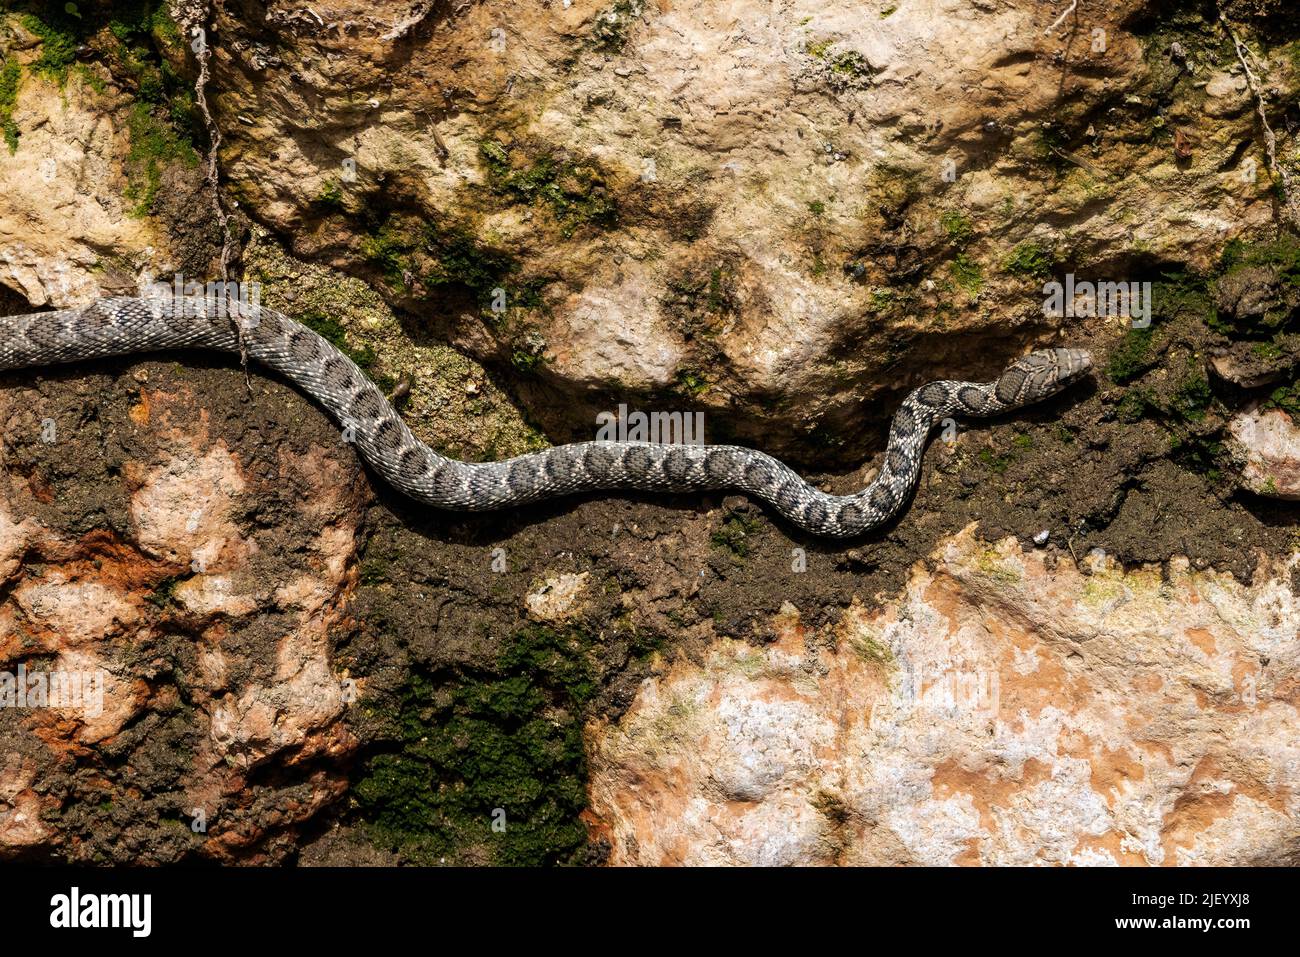 Horse Whip Snake seen hugging a wall along the drying river bed of the Rio Jate, La Herradura, Almuneca, Andalucia, Spain. 20th June 2022 Stock Photo